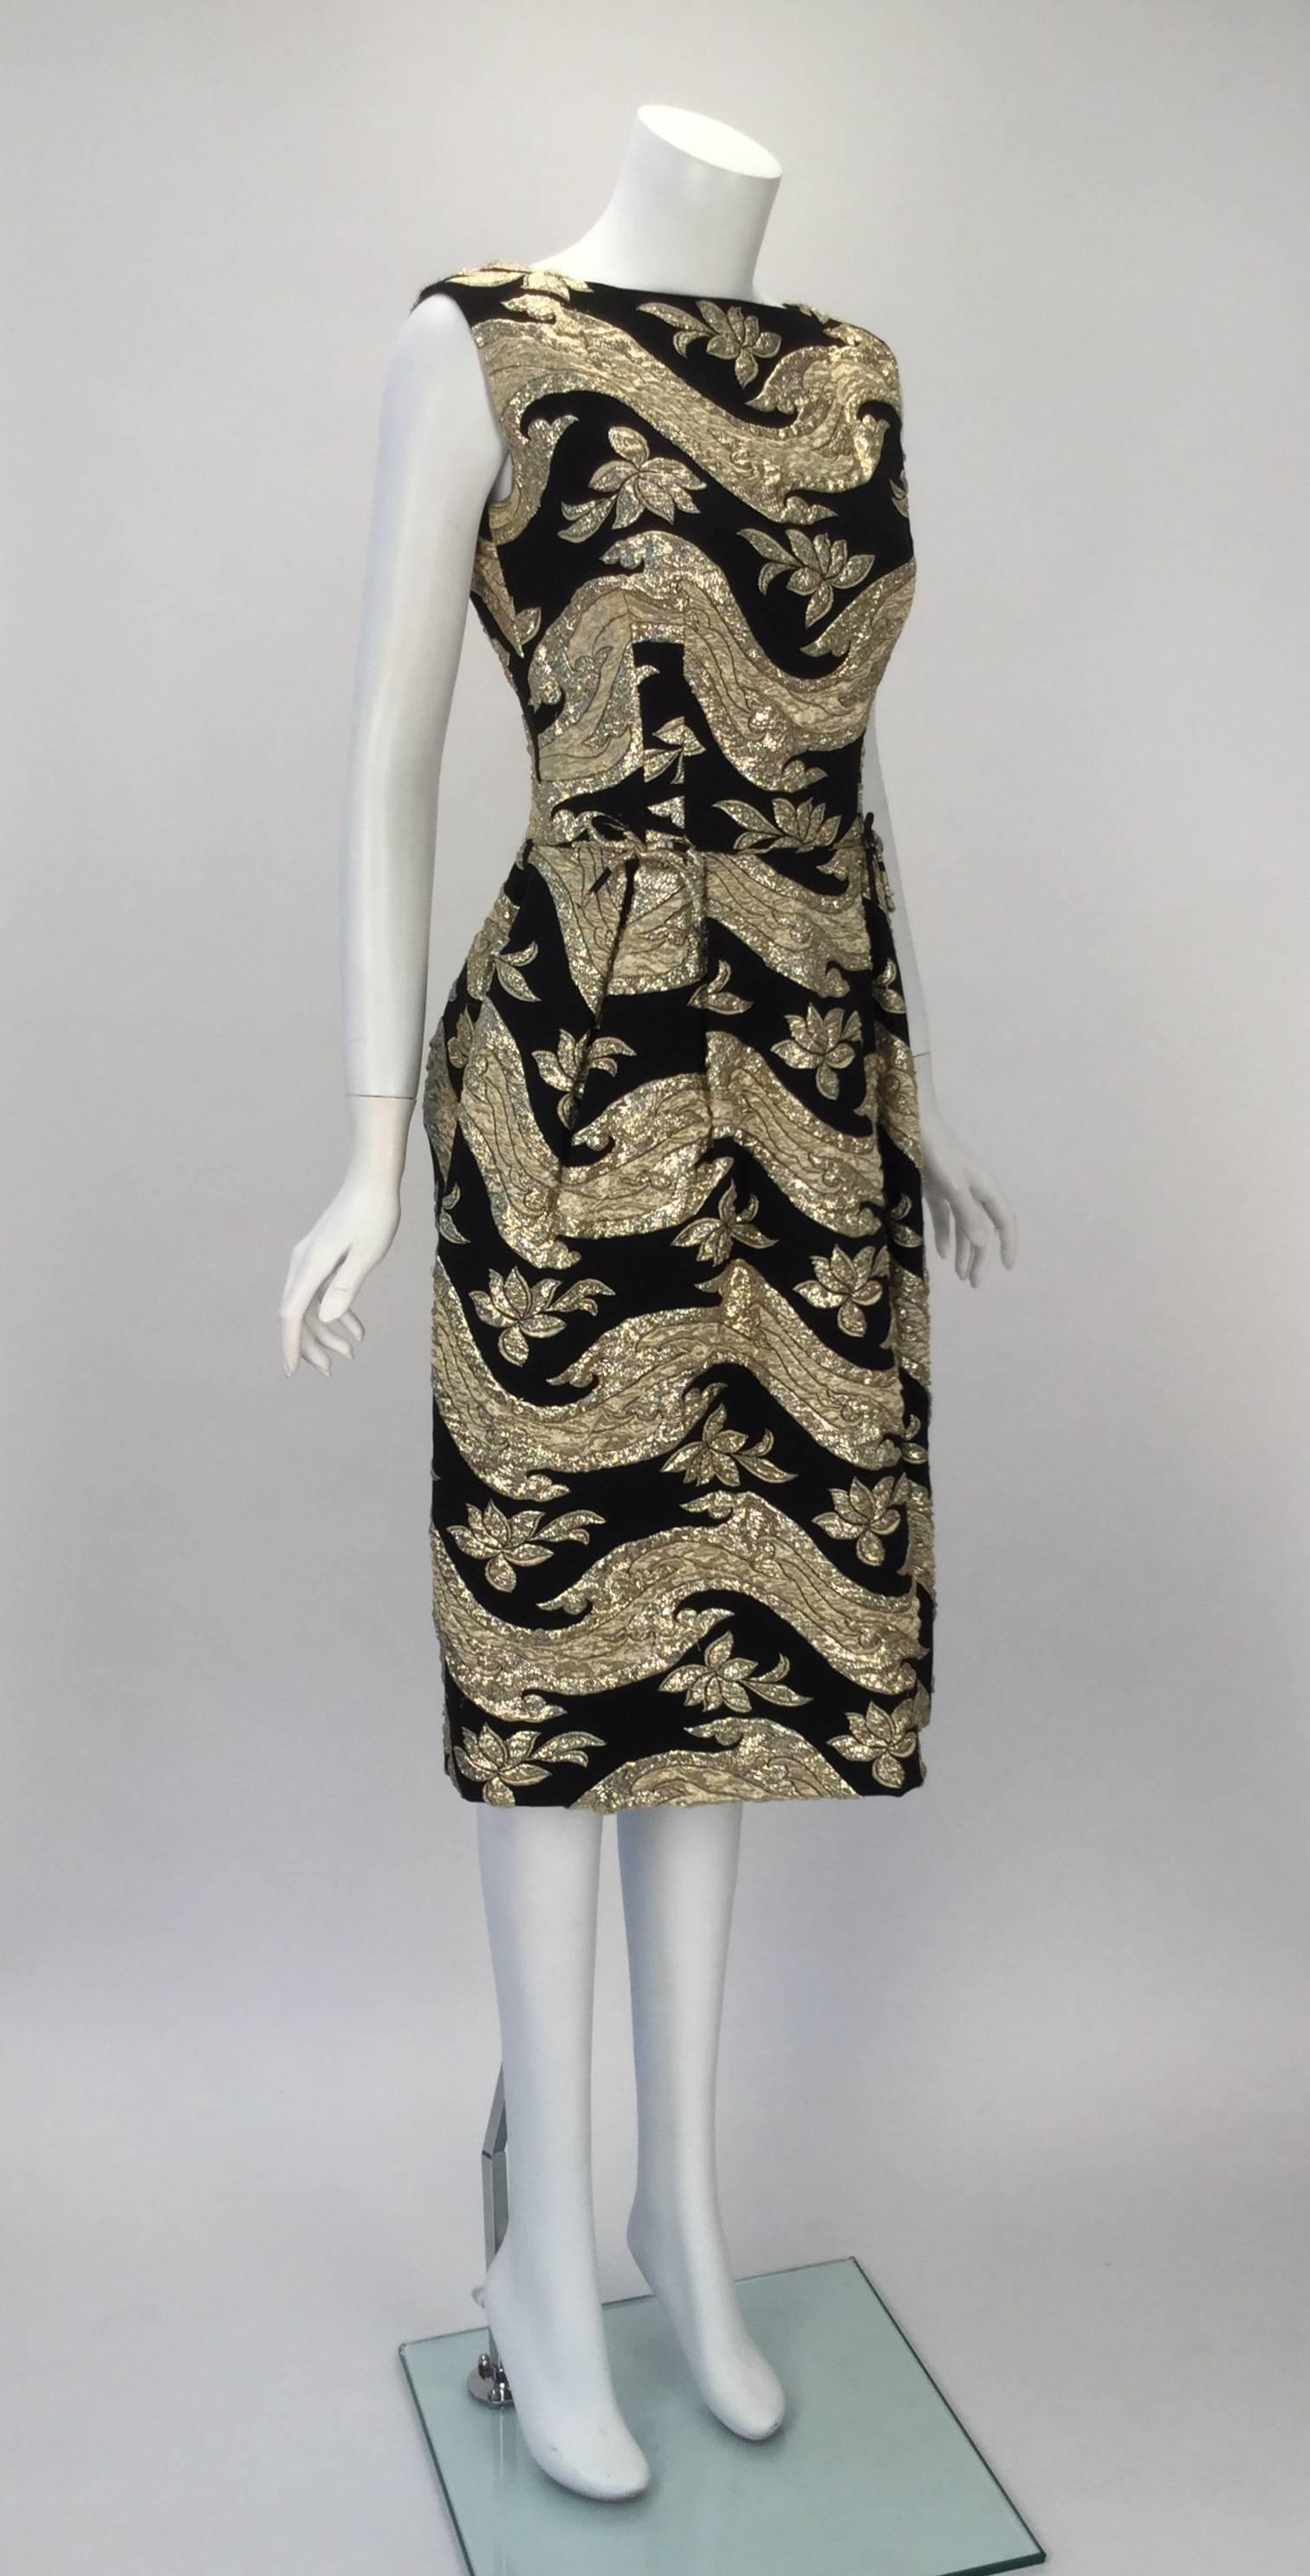 This Hannah Troy dress is perfect for any season, any time of day, or any type of event!  It has a fantastic fit as well!

Dress is black with gold lame patterns all over the dress. Two sweet small bows can be found on the waistline of the dress.